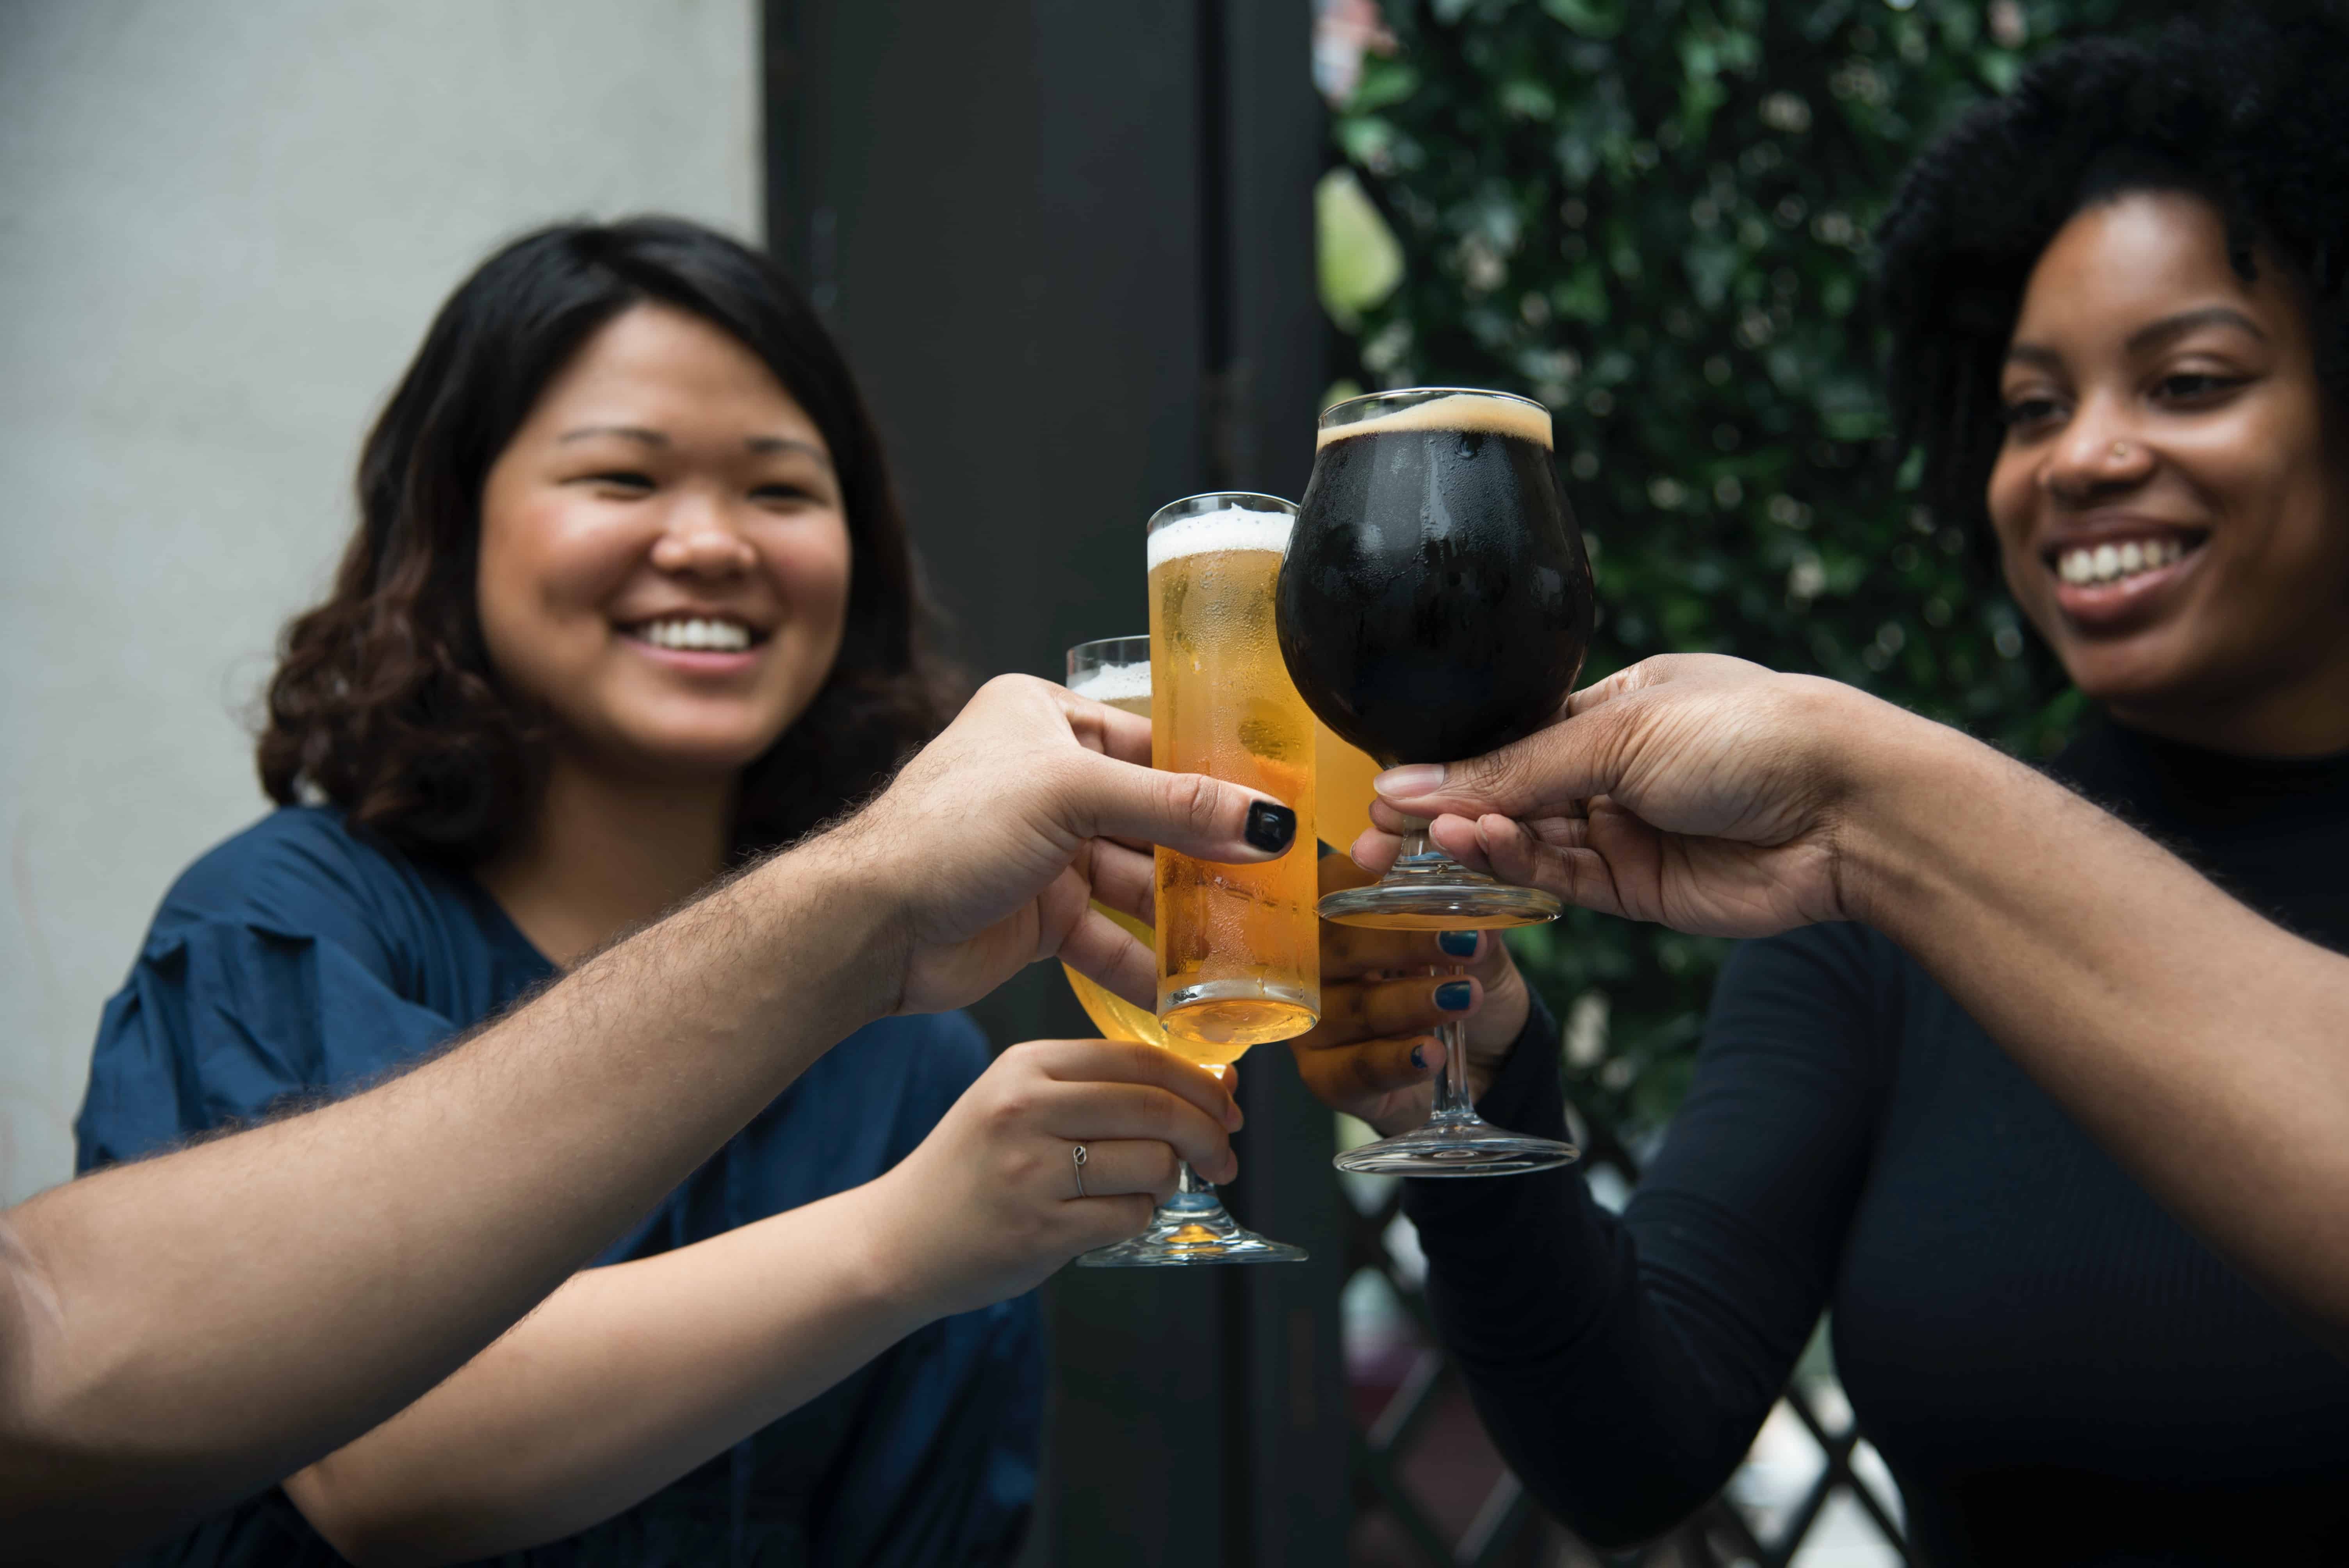 cheers with beer glasses, two women smiling in background